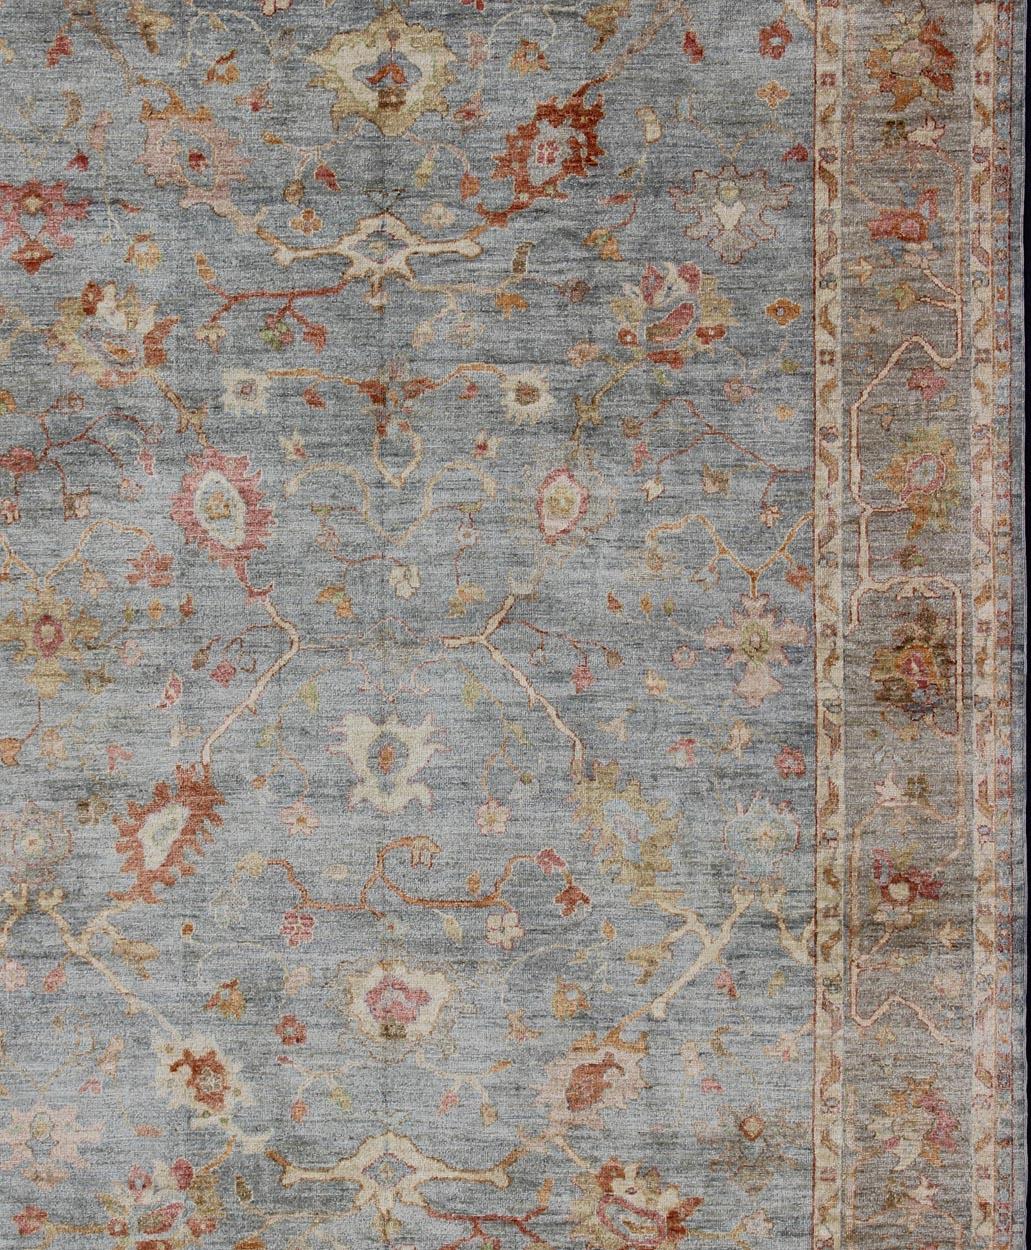 Hand-Knotted Angora Turkish Oushak Large Rug in Gray, Light Blue, and Coral